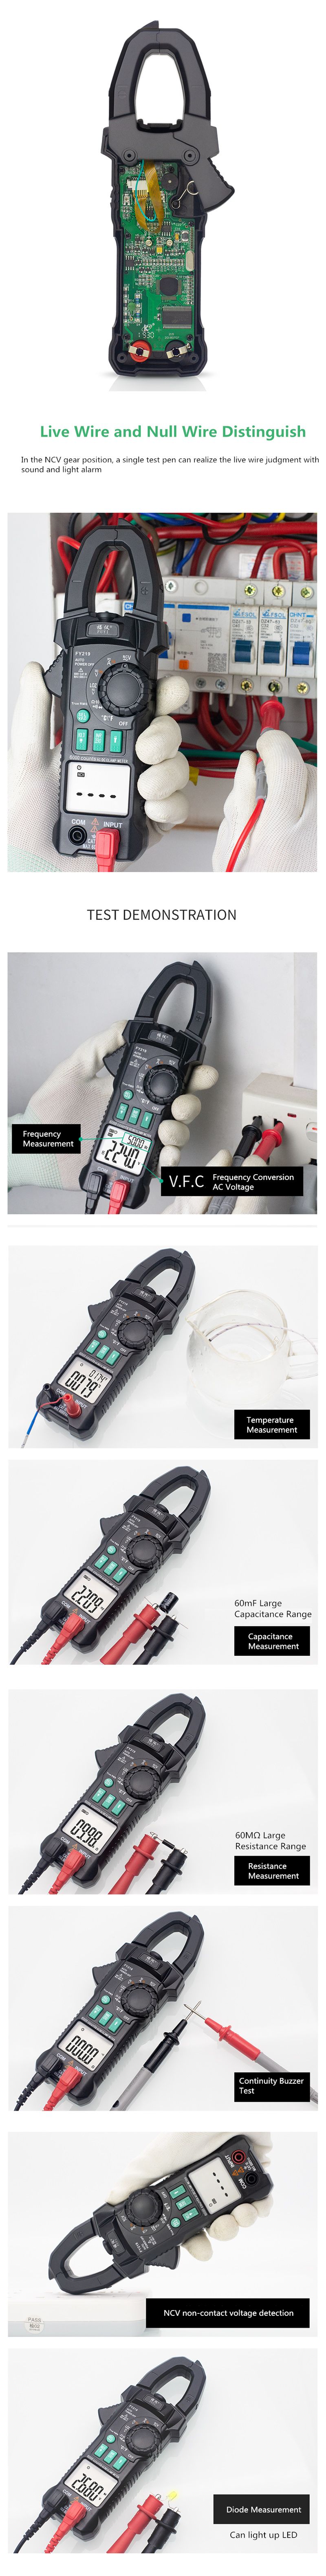 FUYI-FY219-Double-Display-ACDC-True-RMS-Digital-Clamp-Meter-Portable-Multimeter-Voltage-Current-Mete-1627563